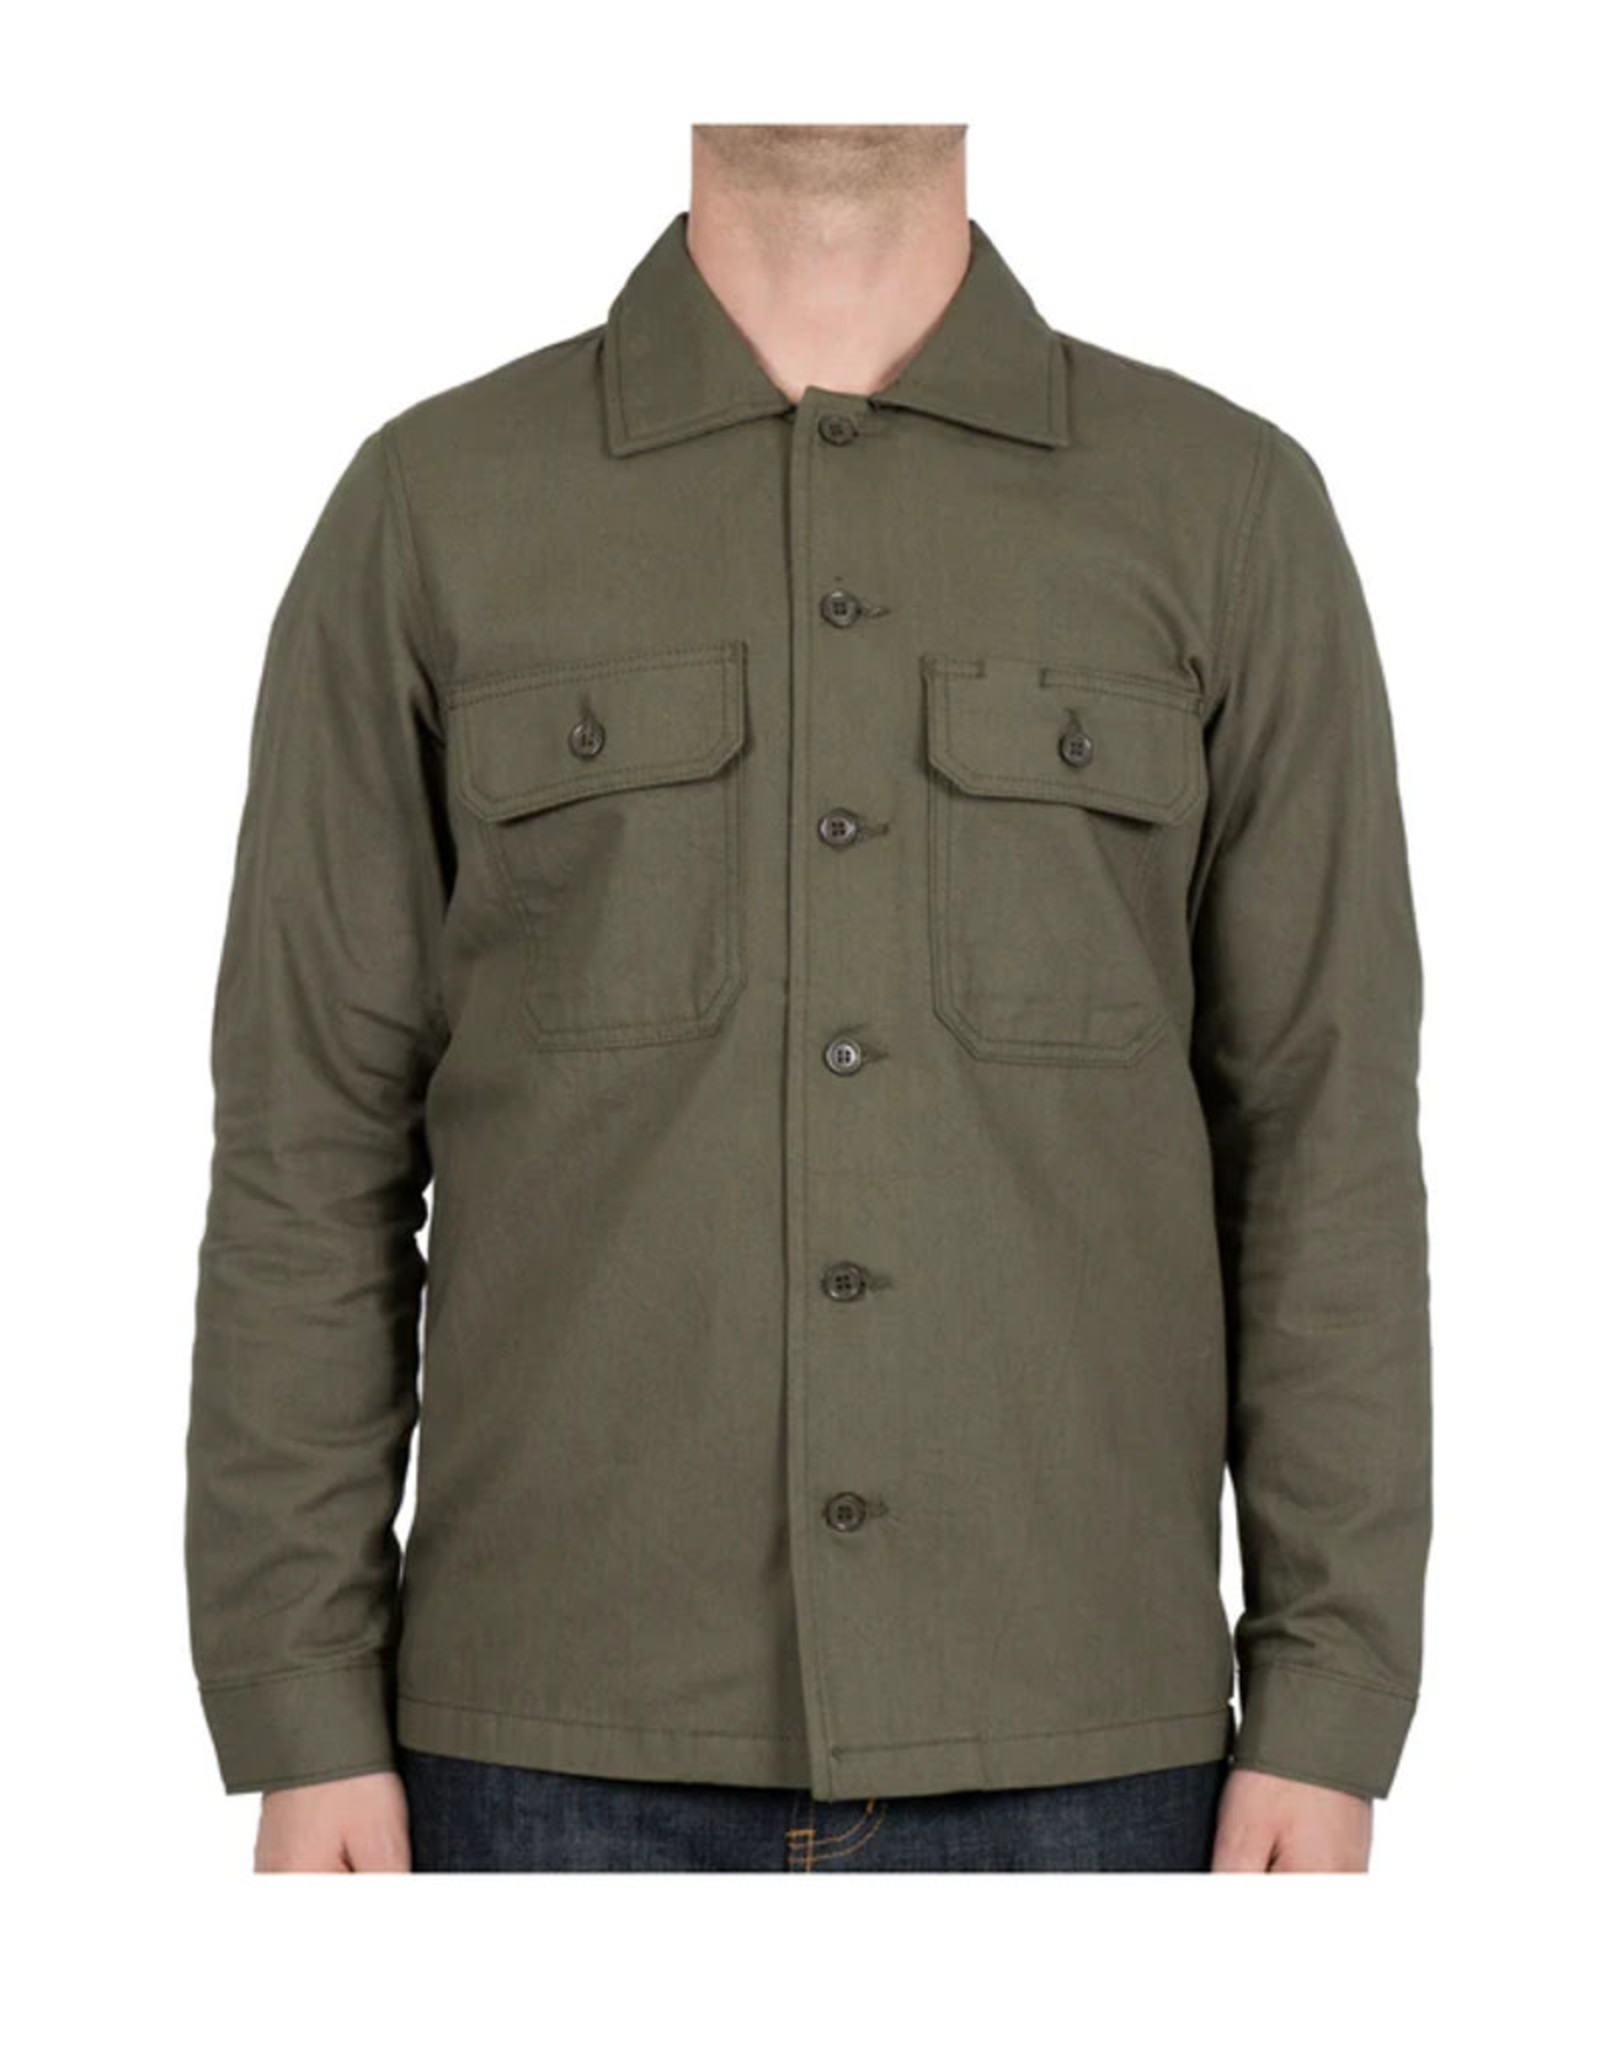 Naked and Famous Work Shirt AH2223 Naked and Famous Green rinsed Oxford